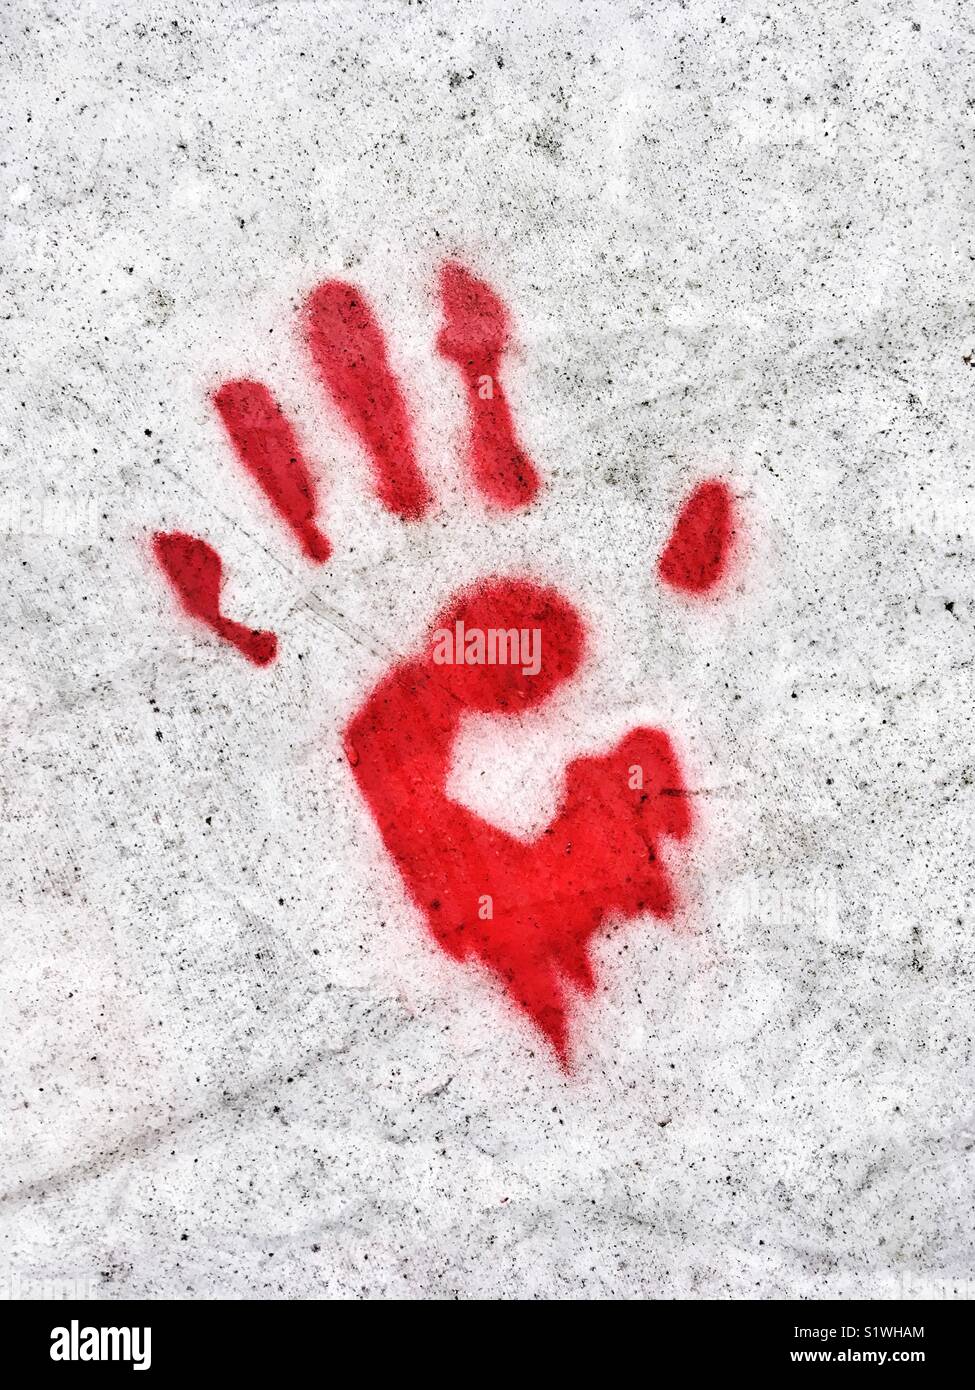 A red Hand print Stock Photo